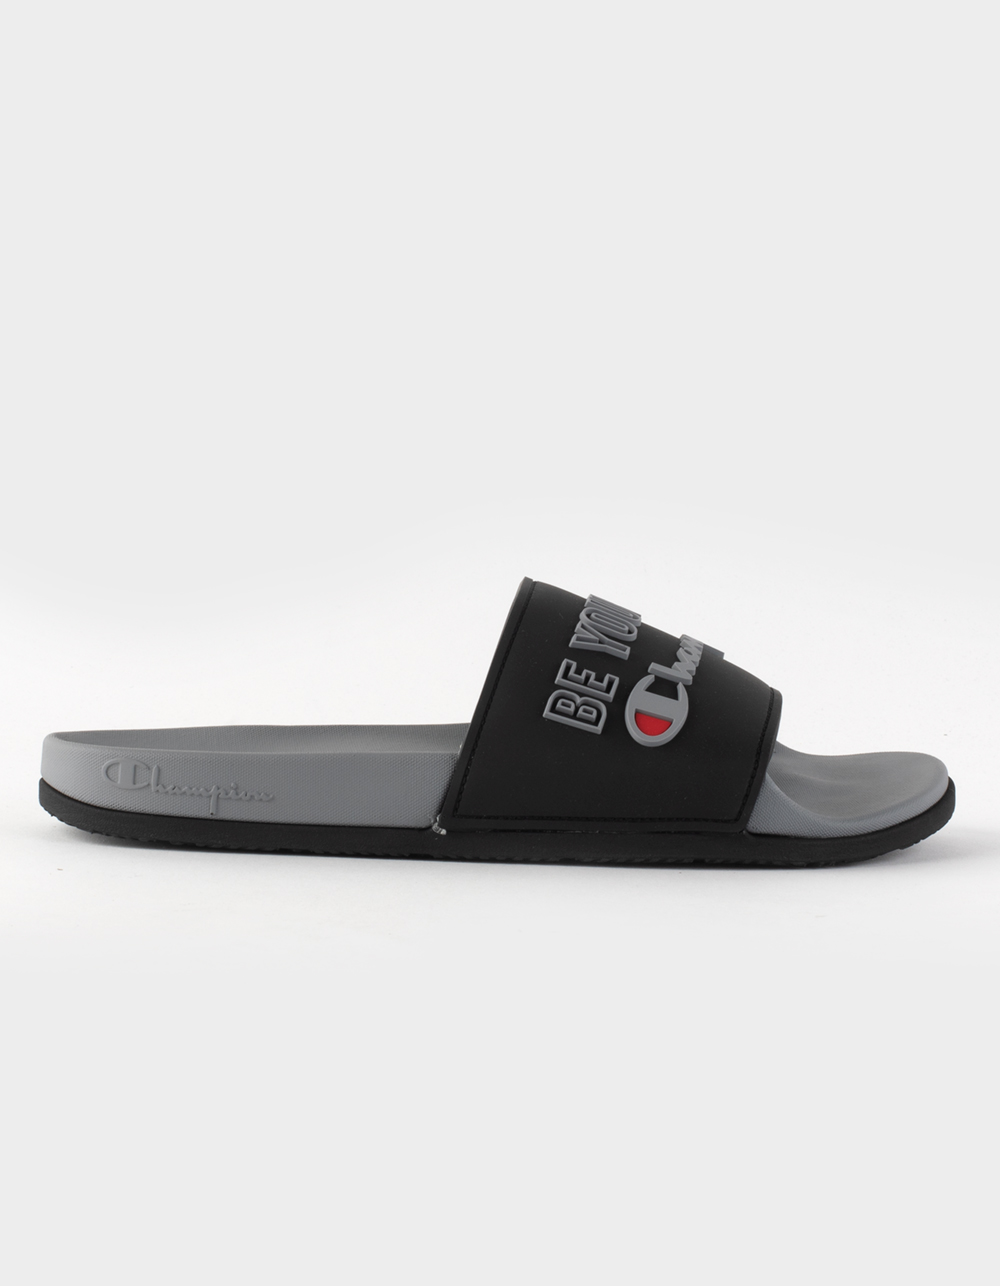 CHAMPION Be Your Own Champion IPO Squish Mens Slide Sandals - BLK/GRY ...